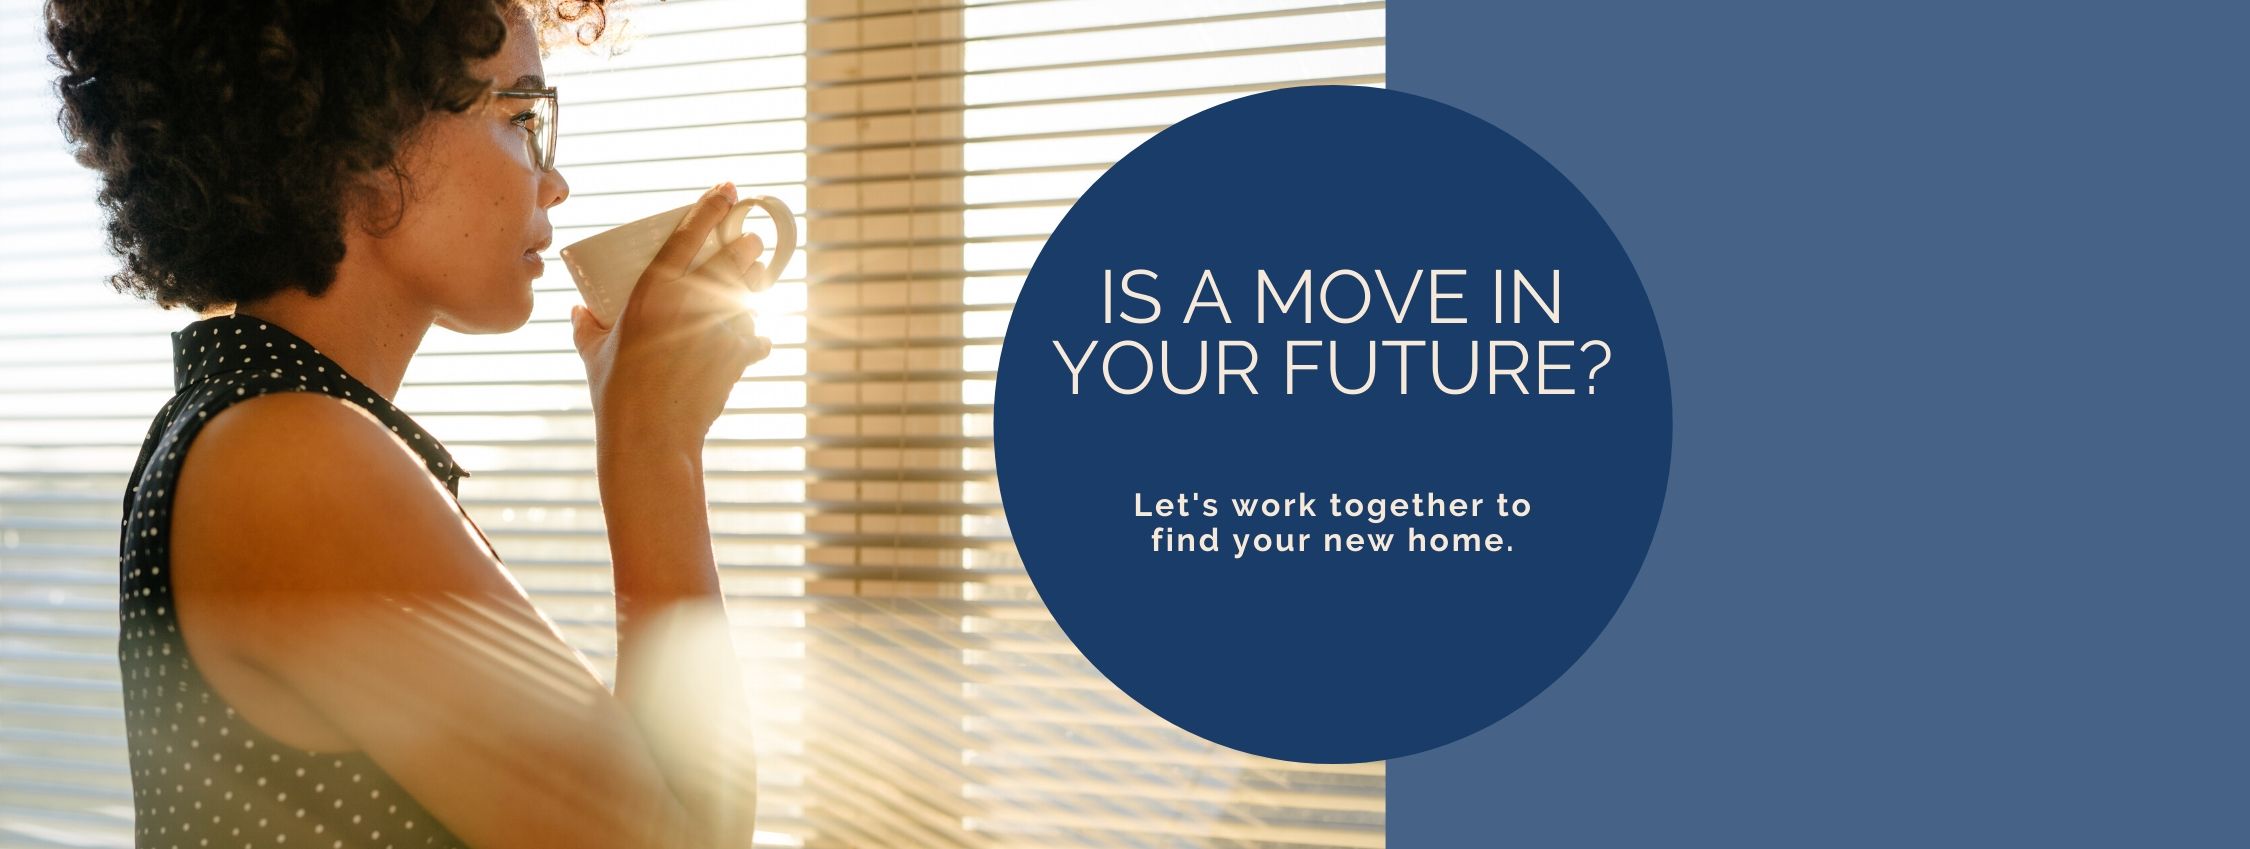 Is a move in your future?